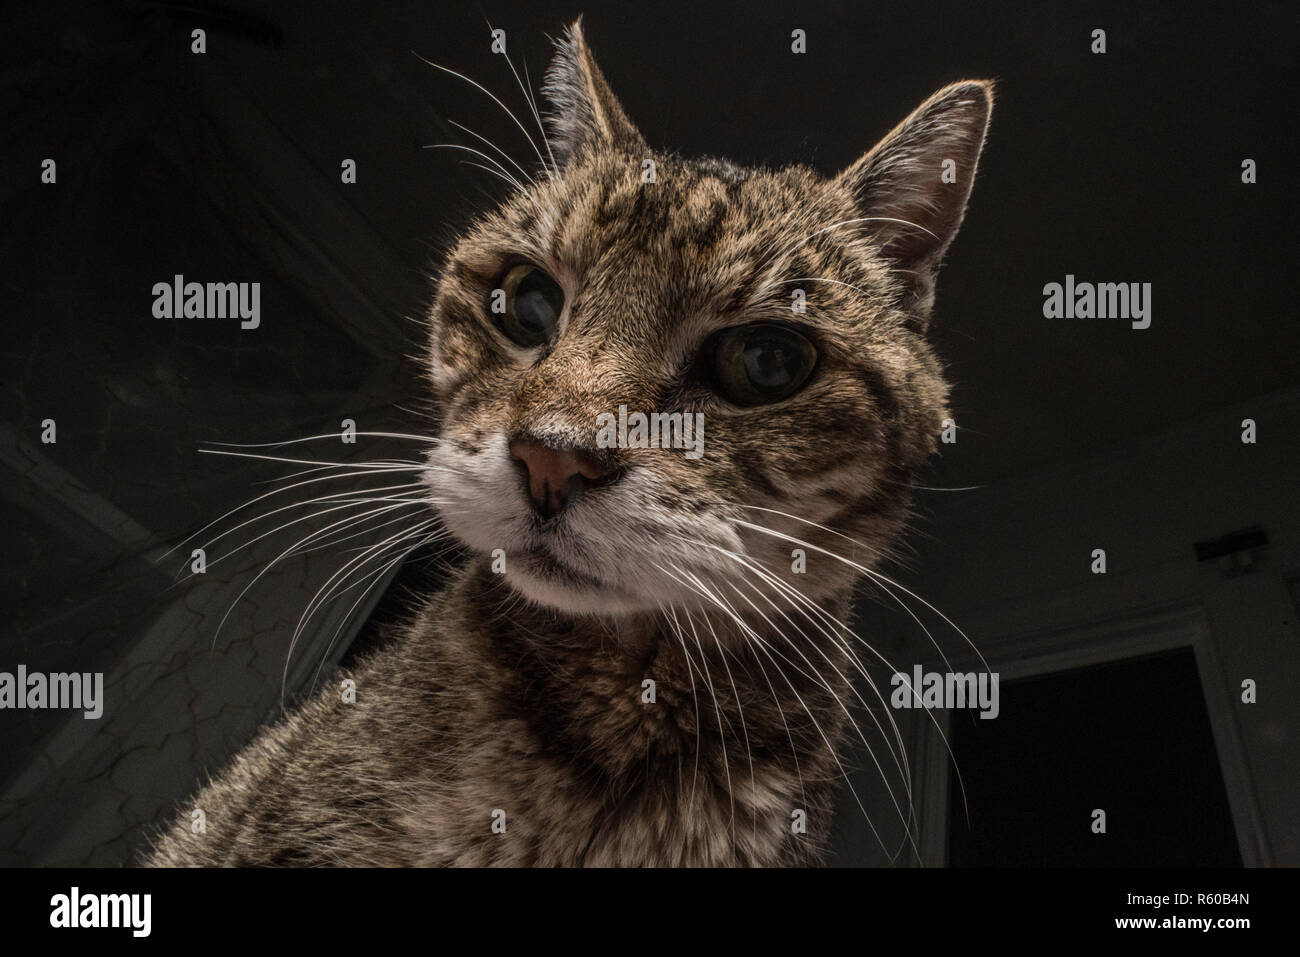 A tabby cat looks ominous when seen from below, perhaps the last thing a mouse ever sees. Stock Photo